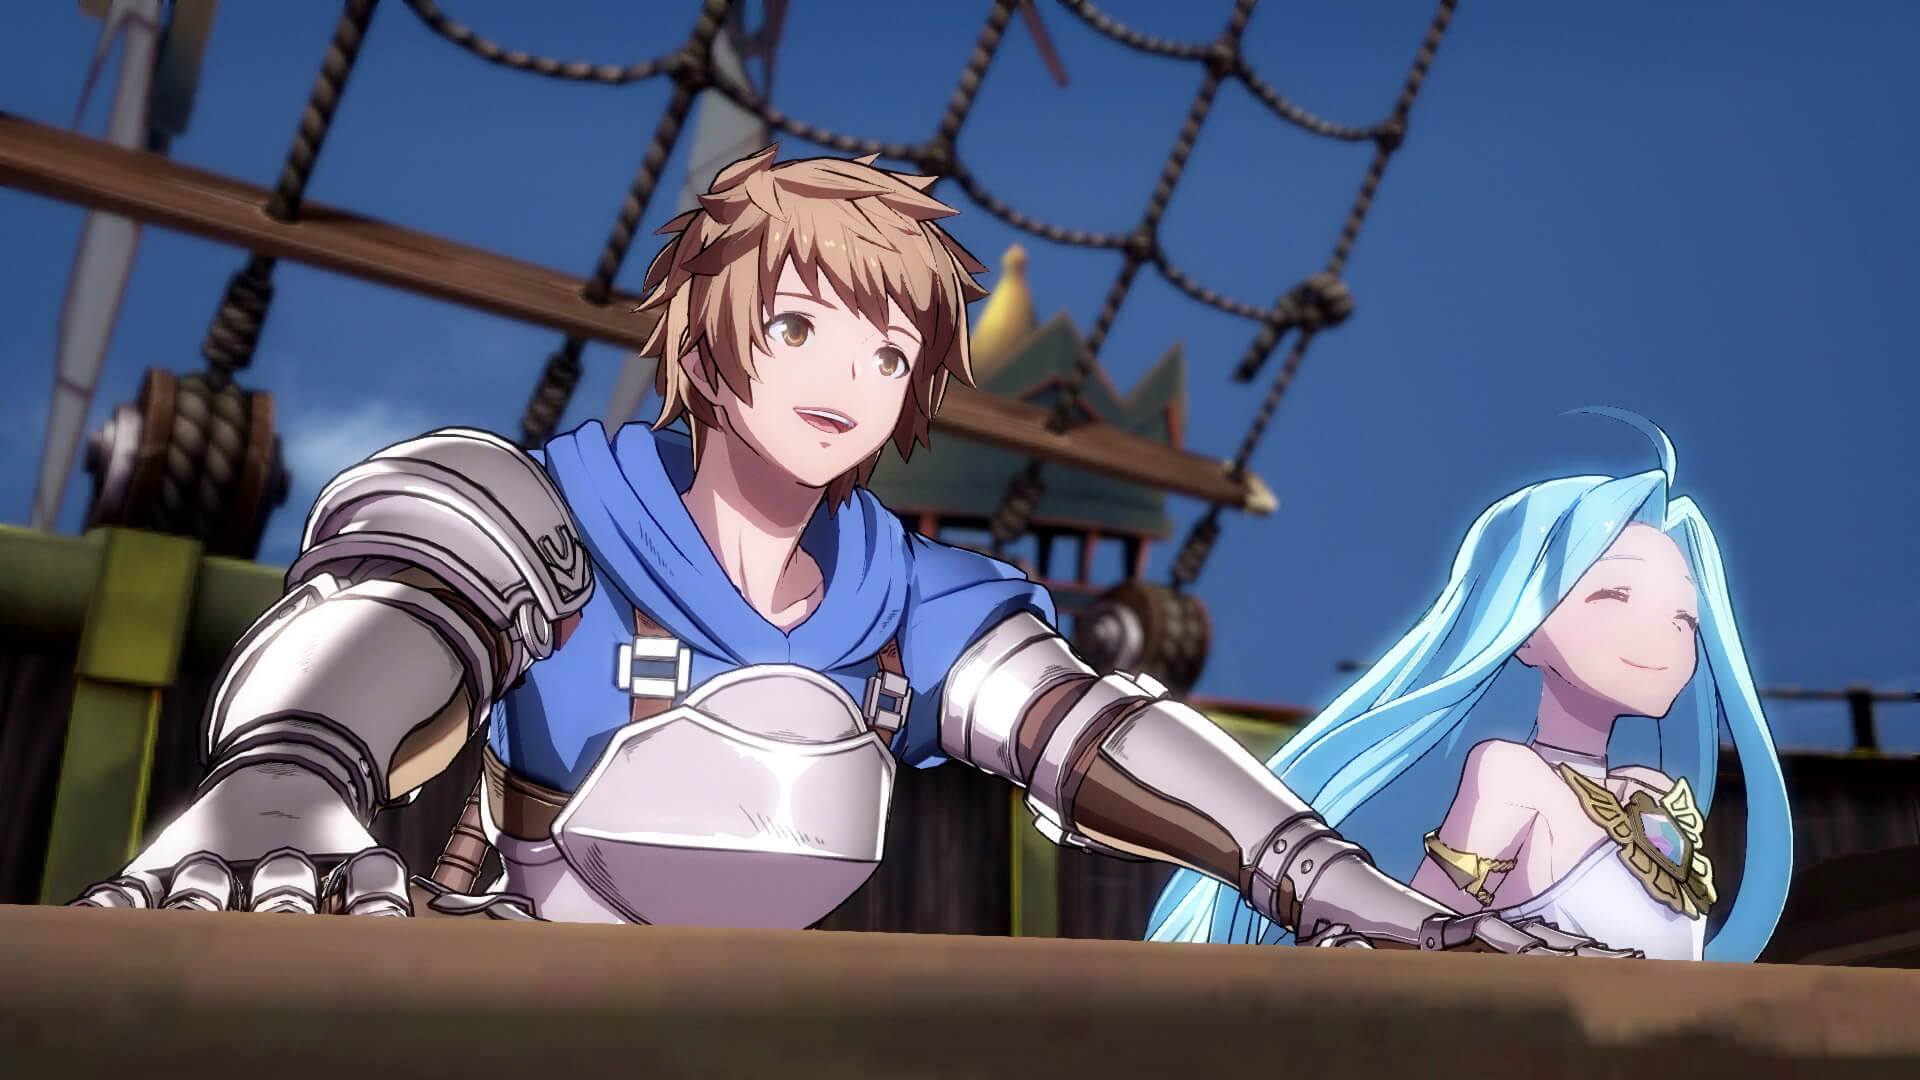 Here is Granblue Fantasy: Versus' launch character select screen